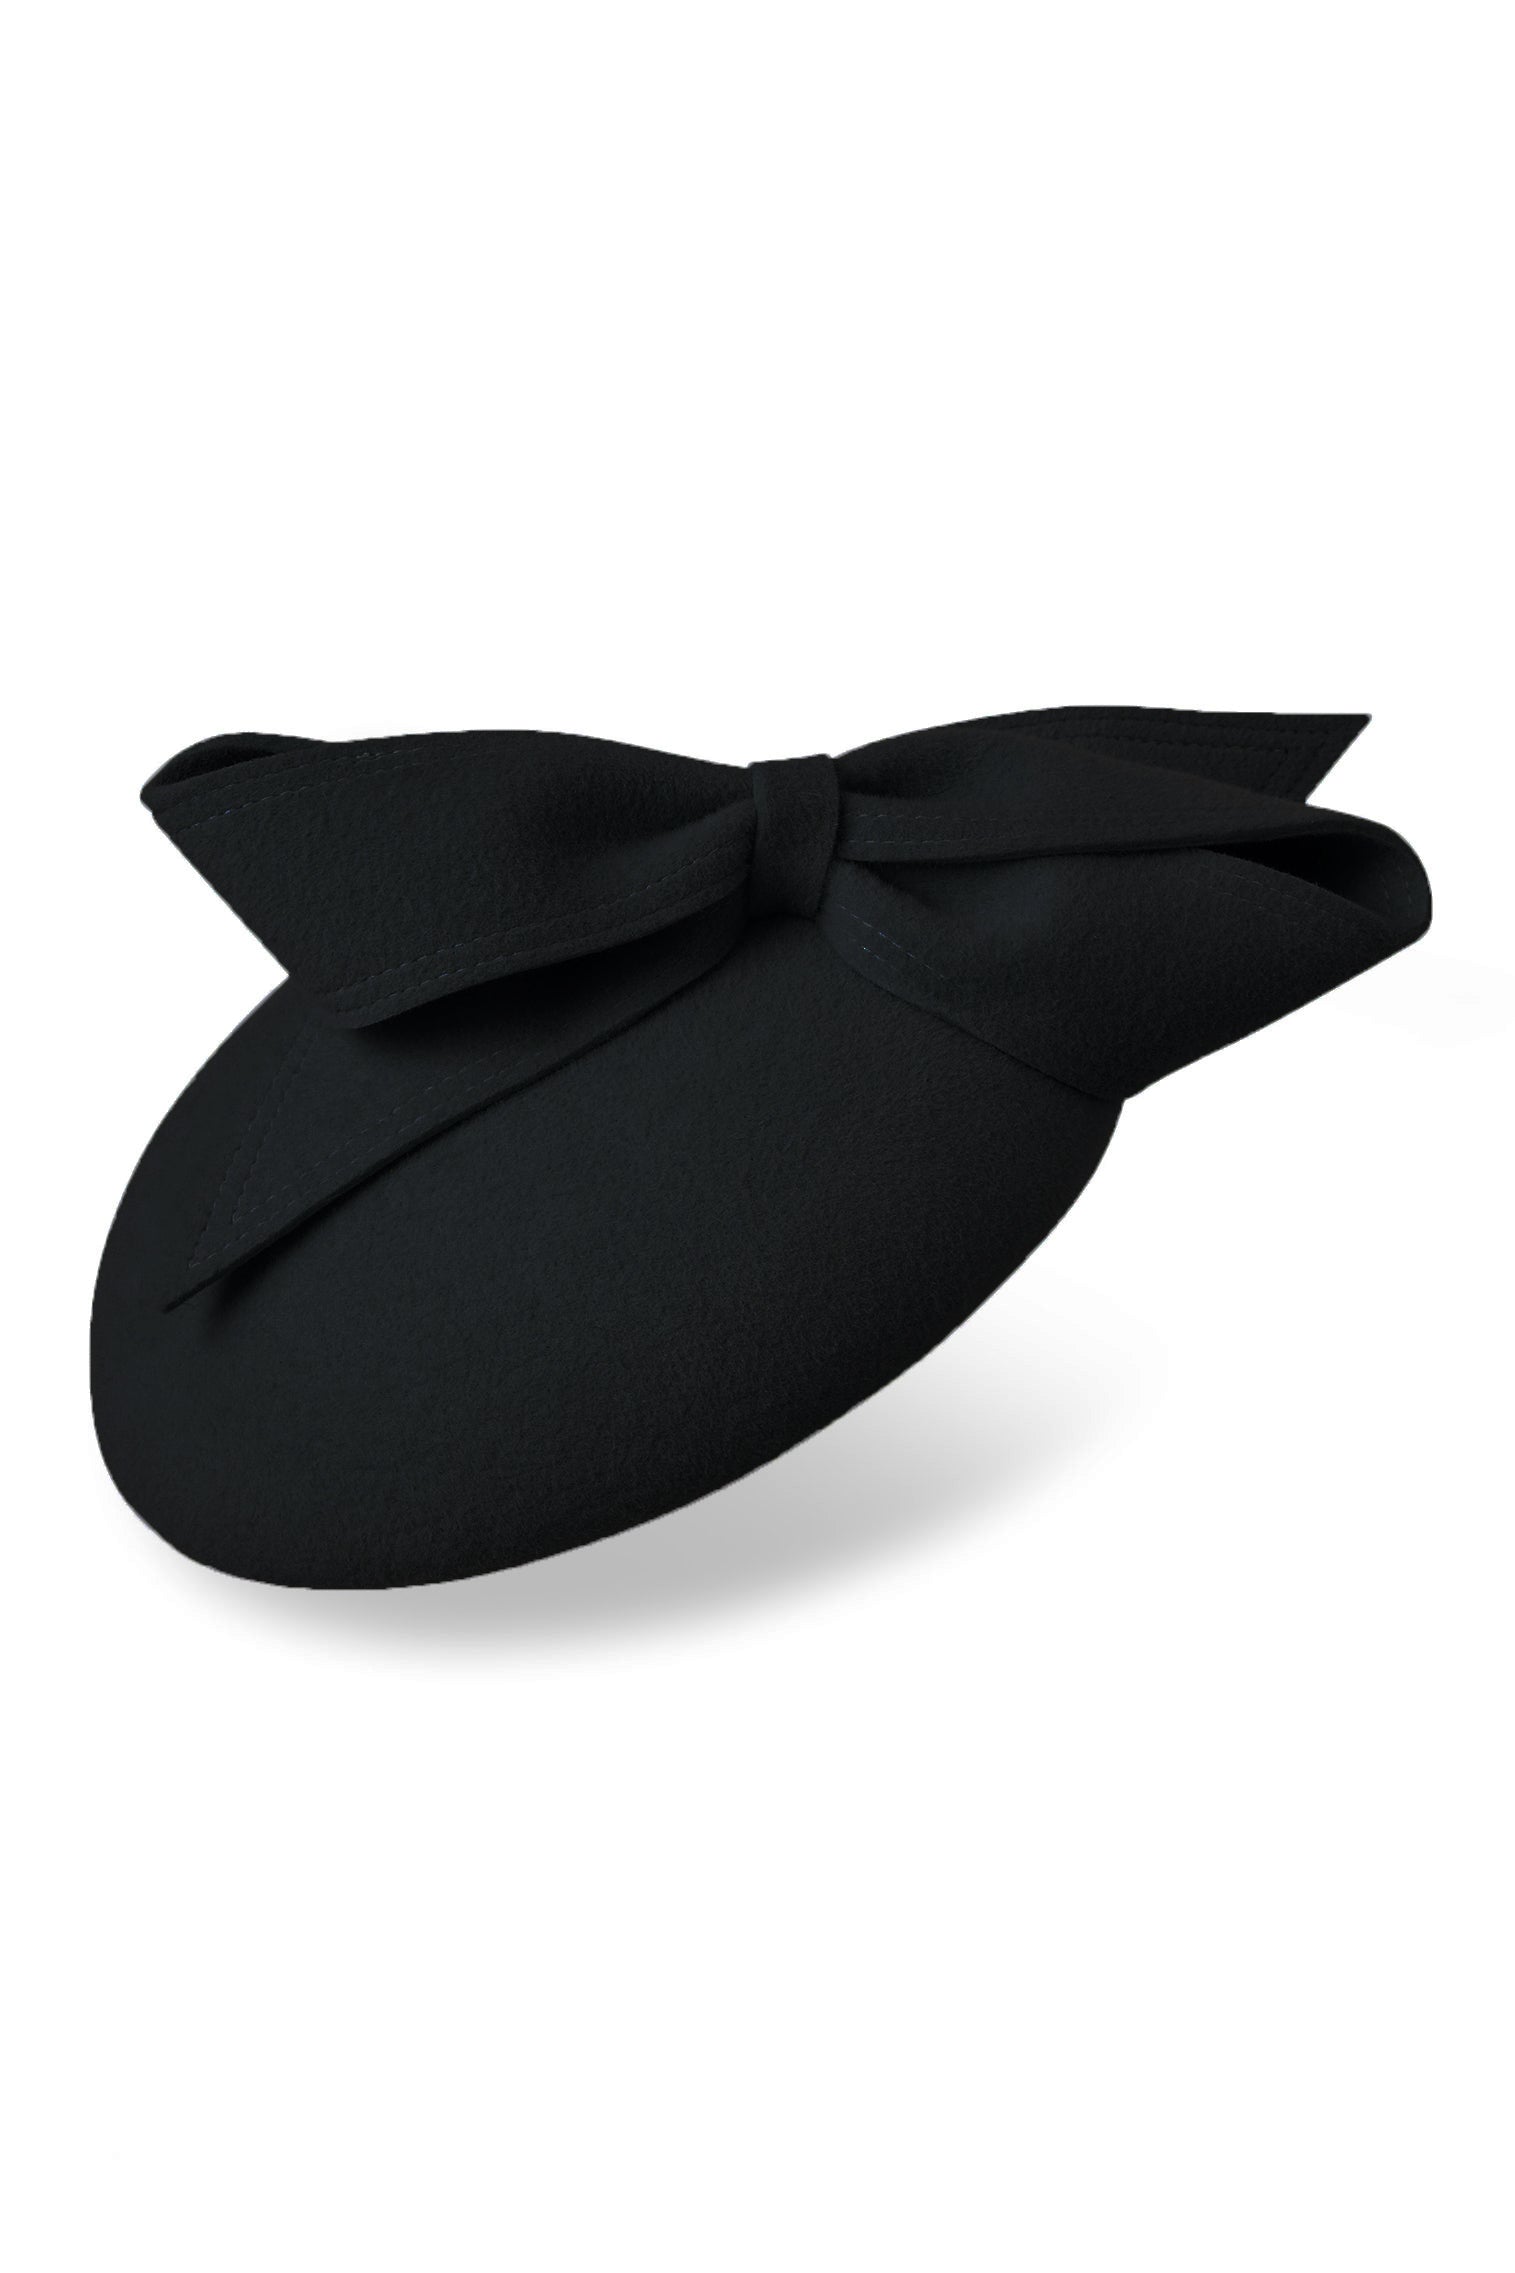 Lana Black Button Hat - Lock Couture by Awon Golding - Lock & Co. Hatters London UK